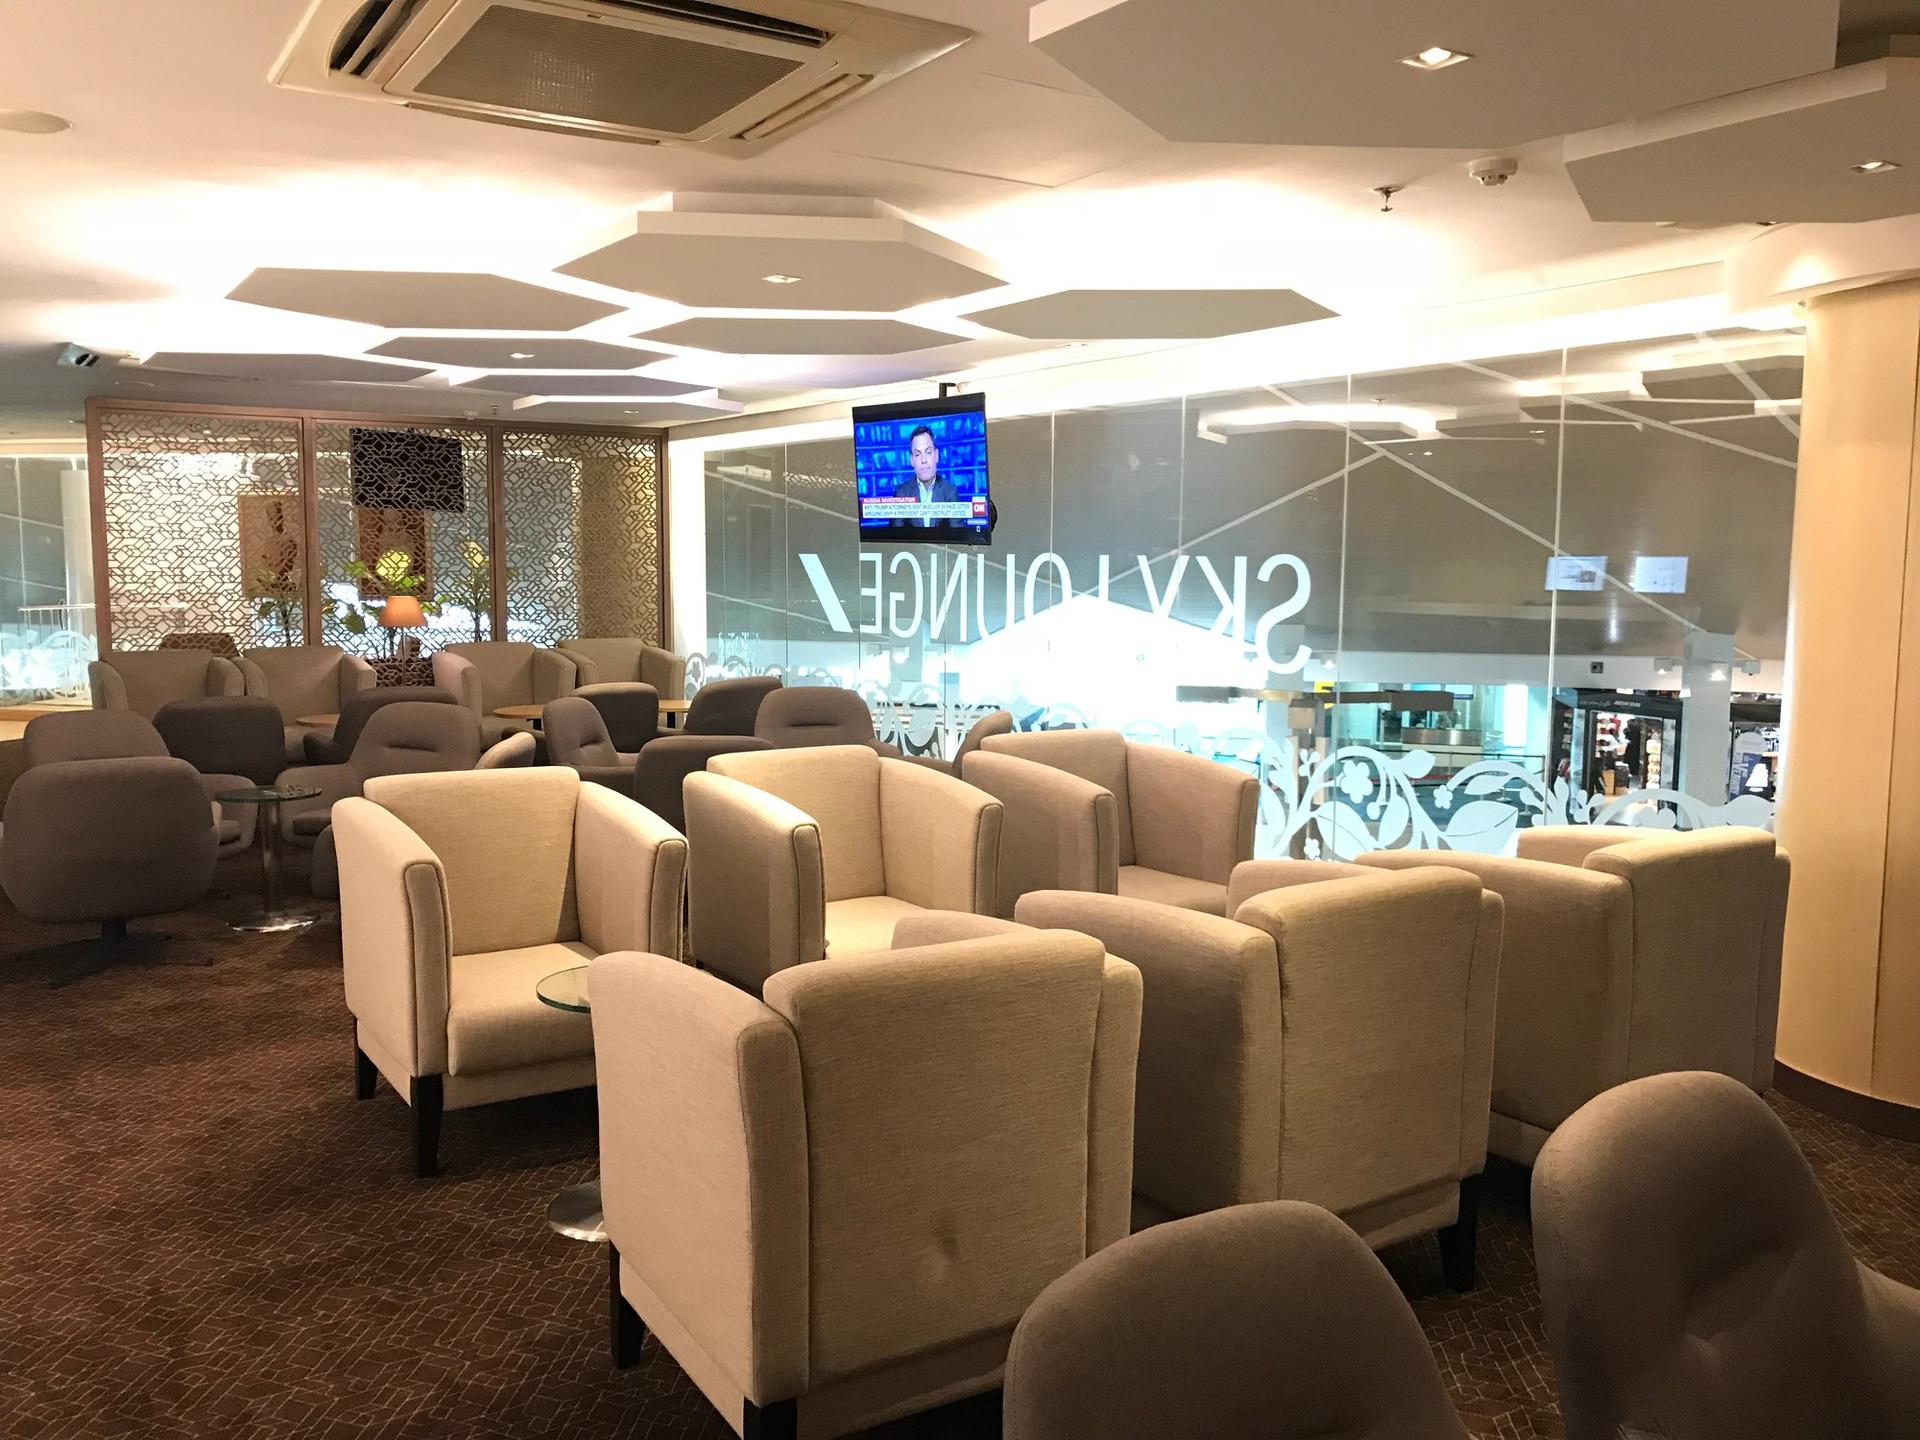 Royal Brunei Airlines Sky Lounge image 1 of 3